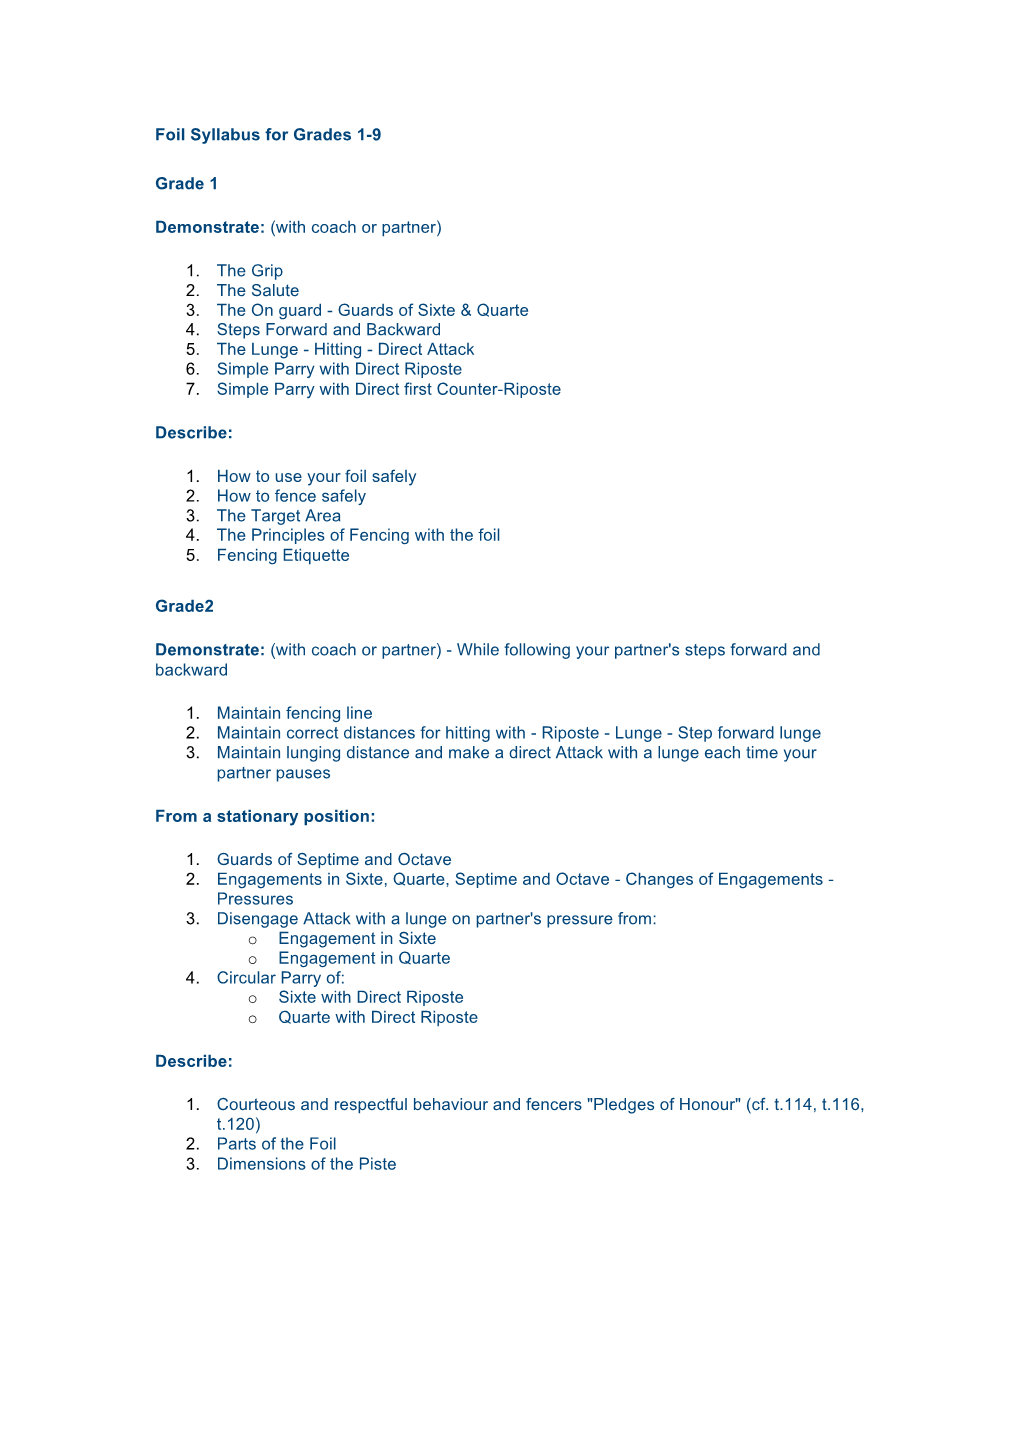 Foil Syllabus for Grades 1-9 Grade 1 Demonstrate: (With Coach Or Partner)